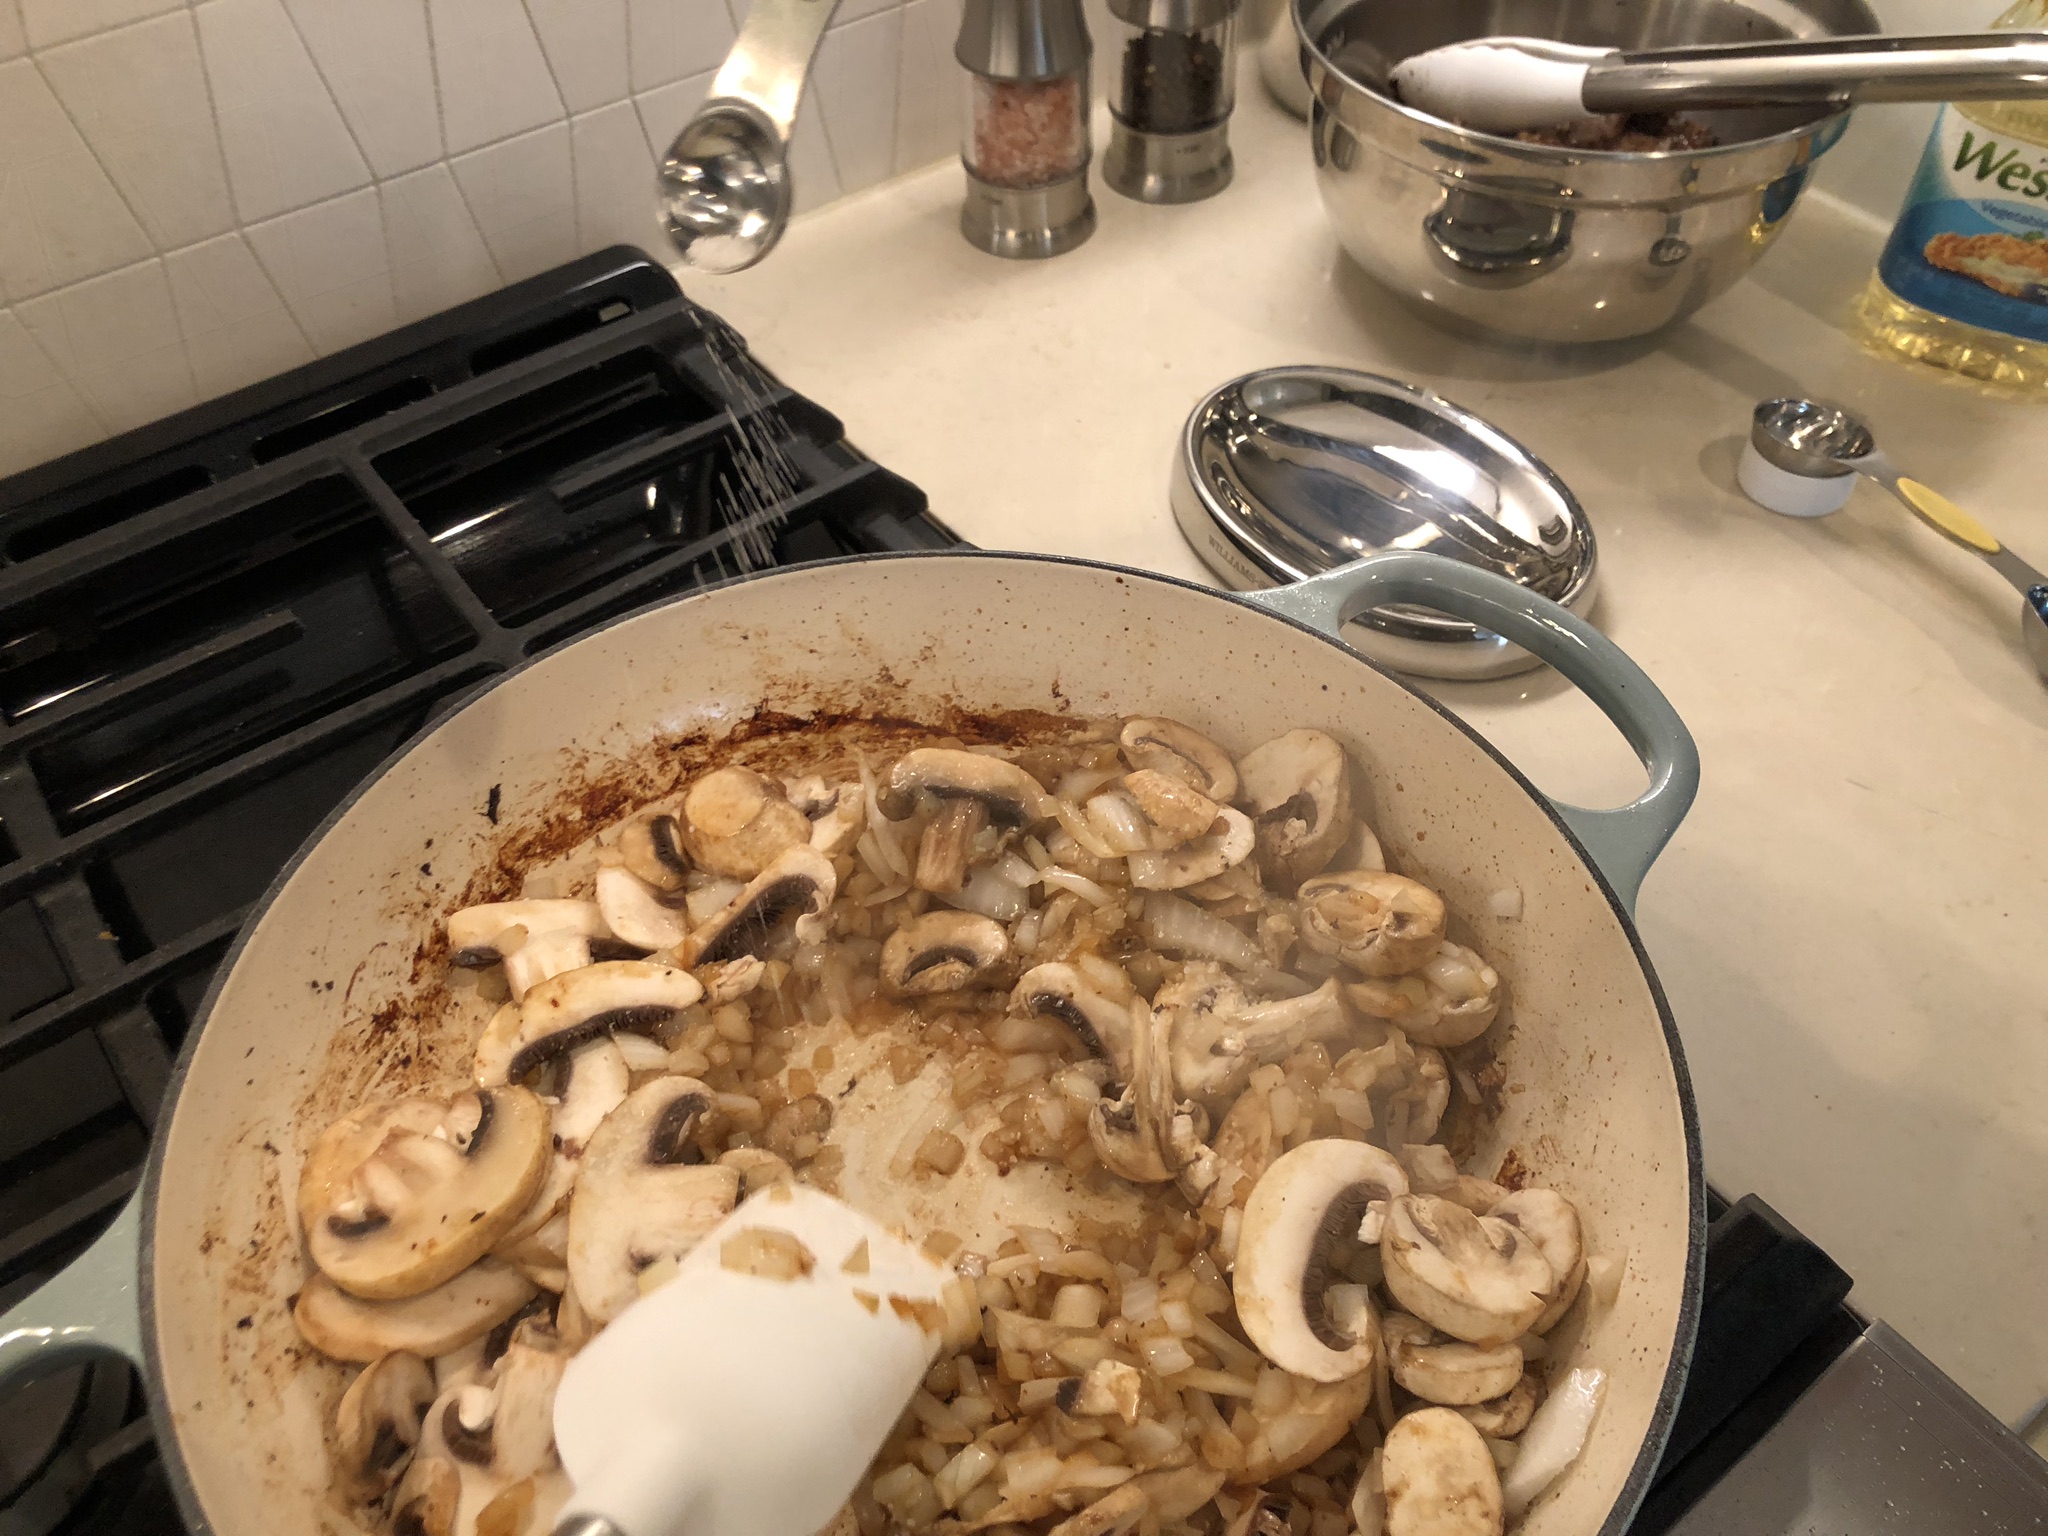 Salting the Oil, Onions, and Mushrooms for Beef Stroganoff